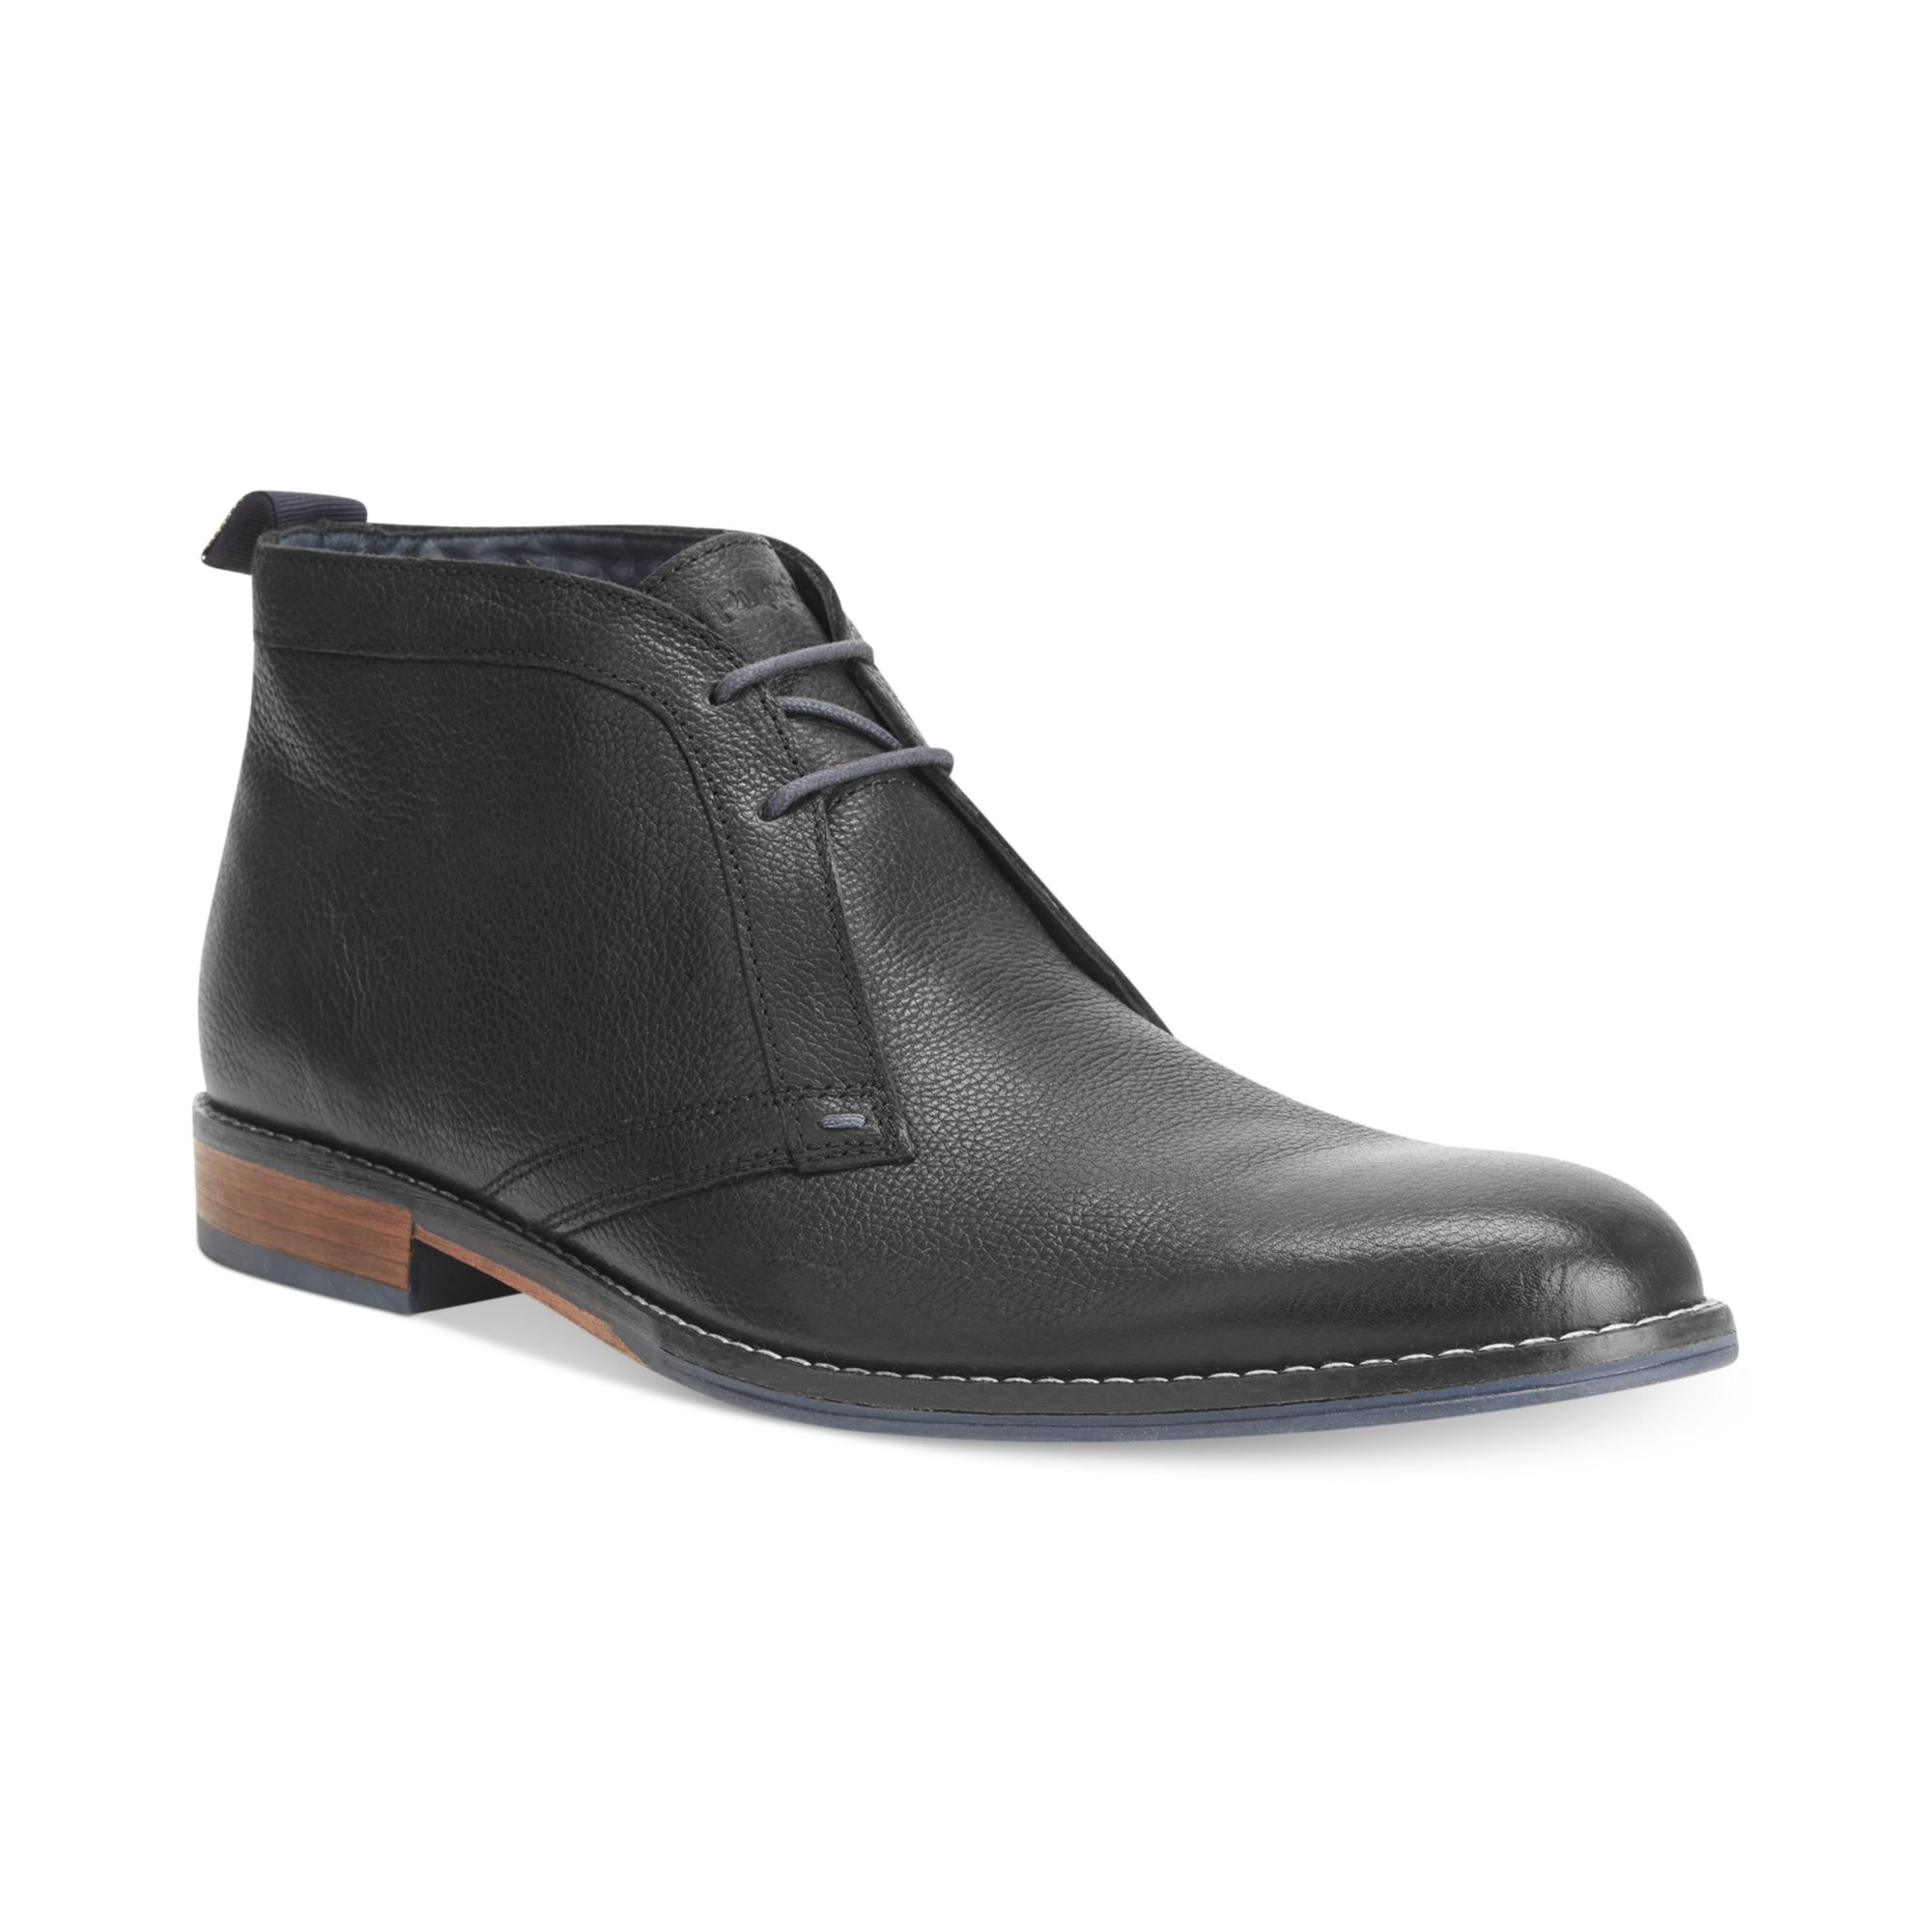 Hush PuppiesÂ® Chukka Style Boots in Black for Men (Black Leather)